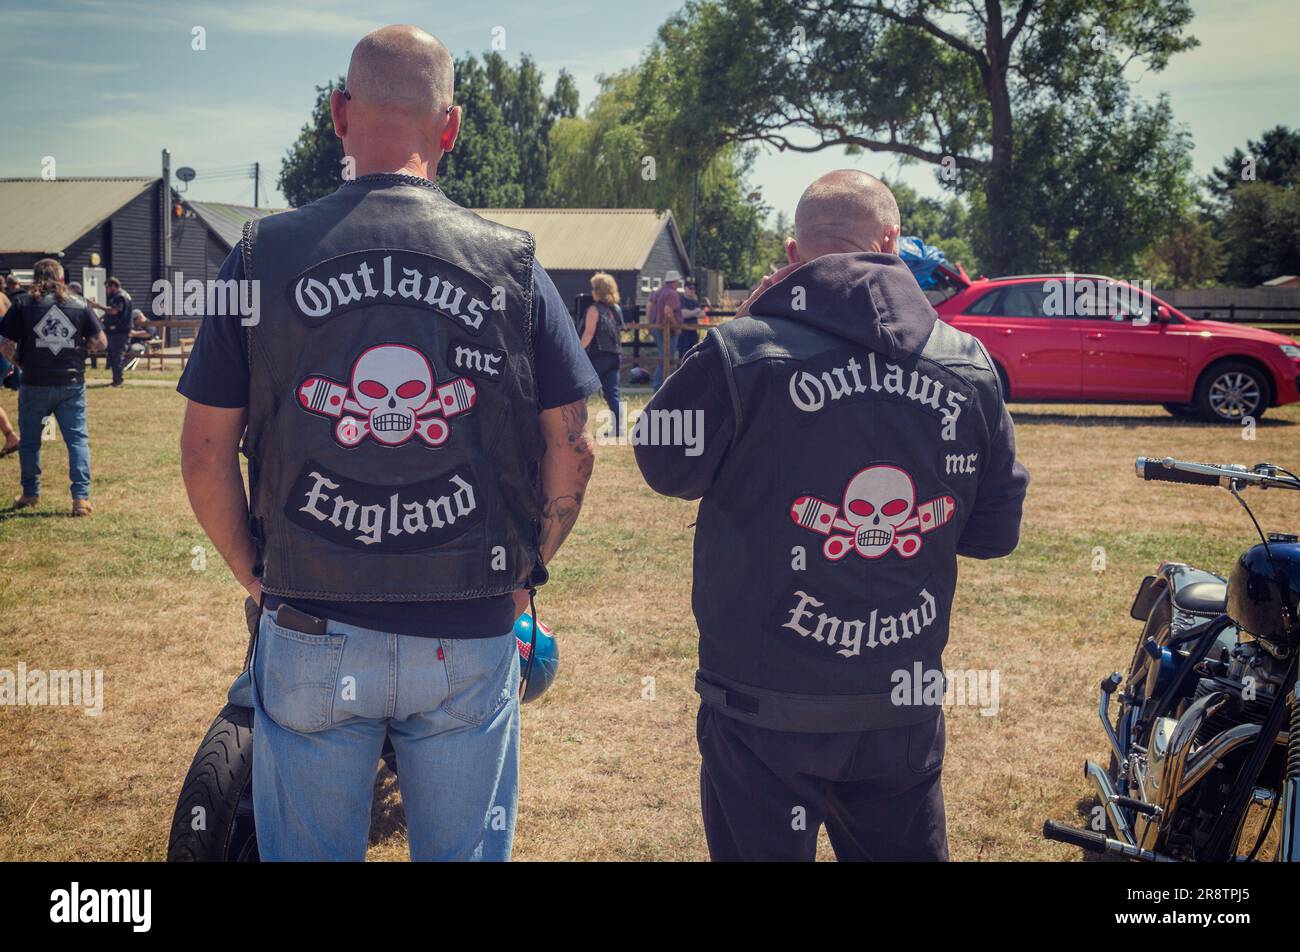 Members of the Outlaws Motorcycle Club wearing their patches at a biker ...